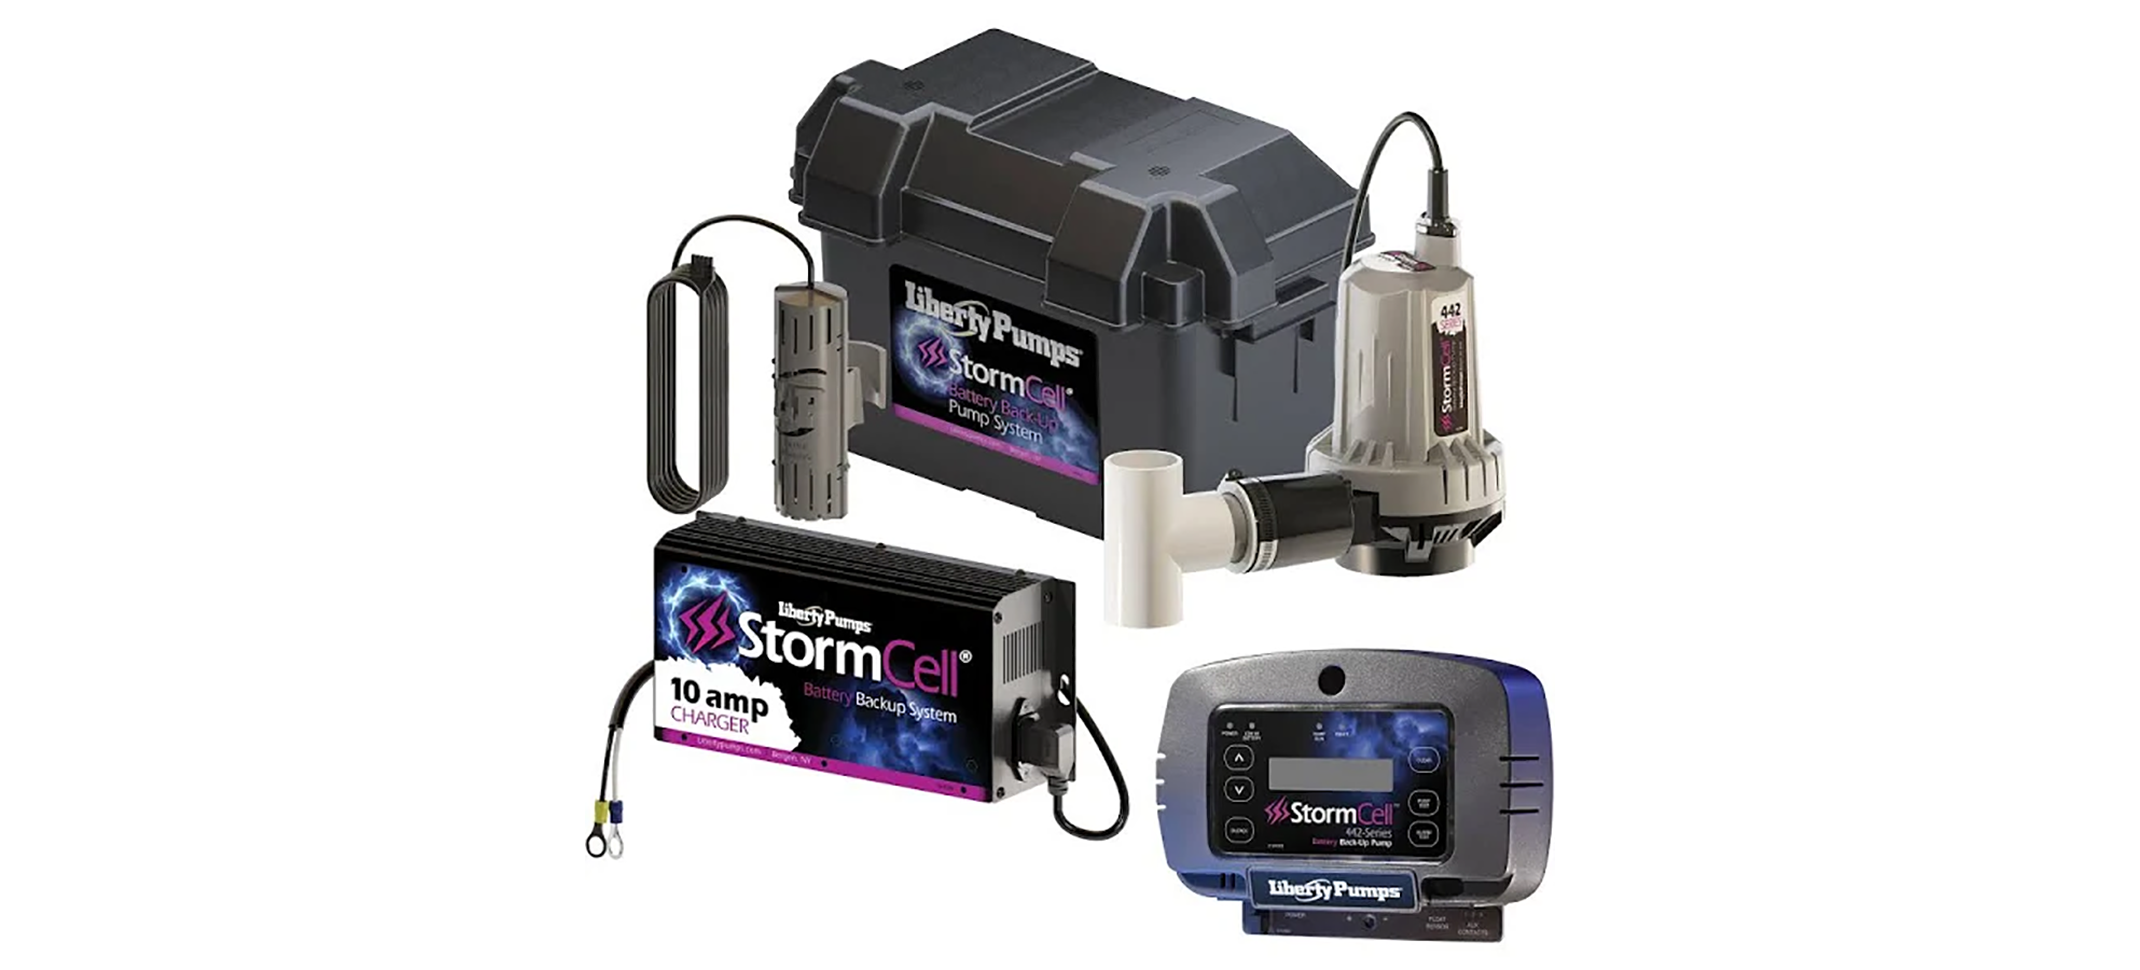 Liberty Pumps 442-10A-EYE, 12V Battery Back-Up Sump Pump System 10 amp, NightEye Wireless Enabled: Backup and Alarm